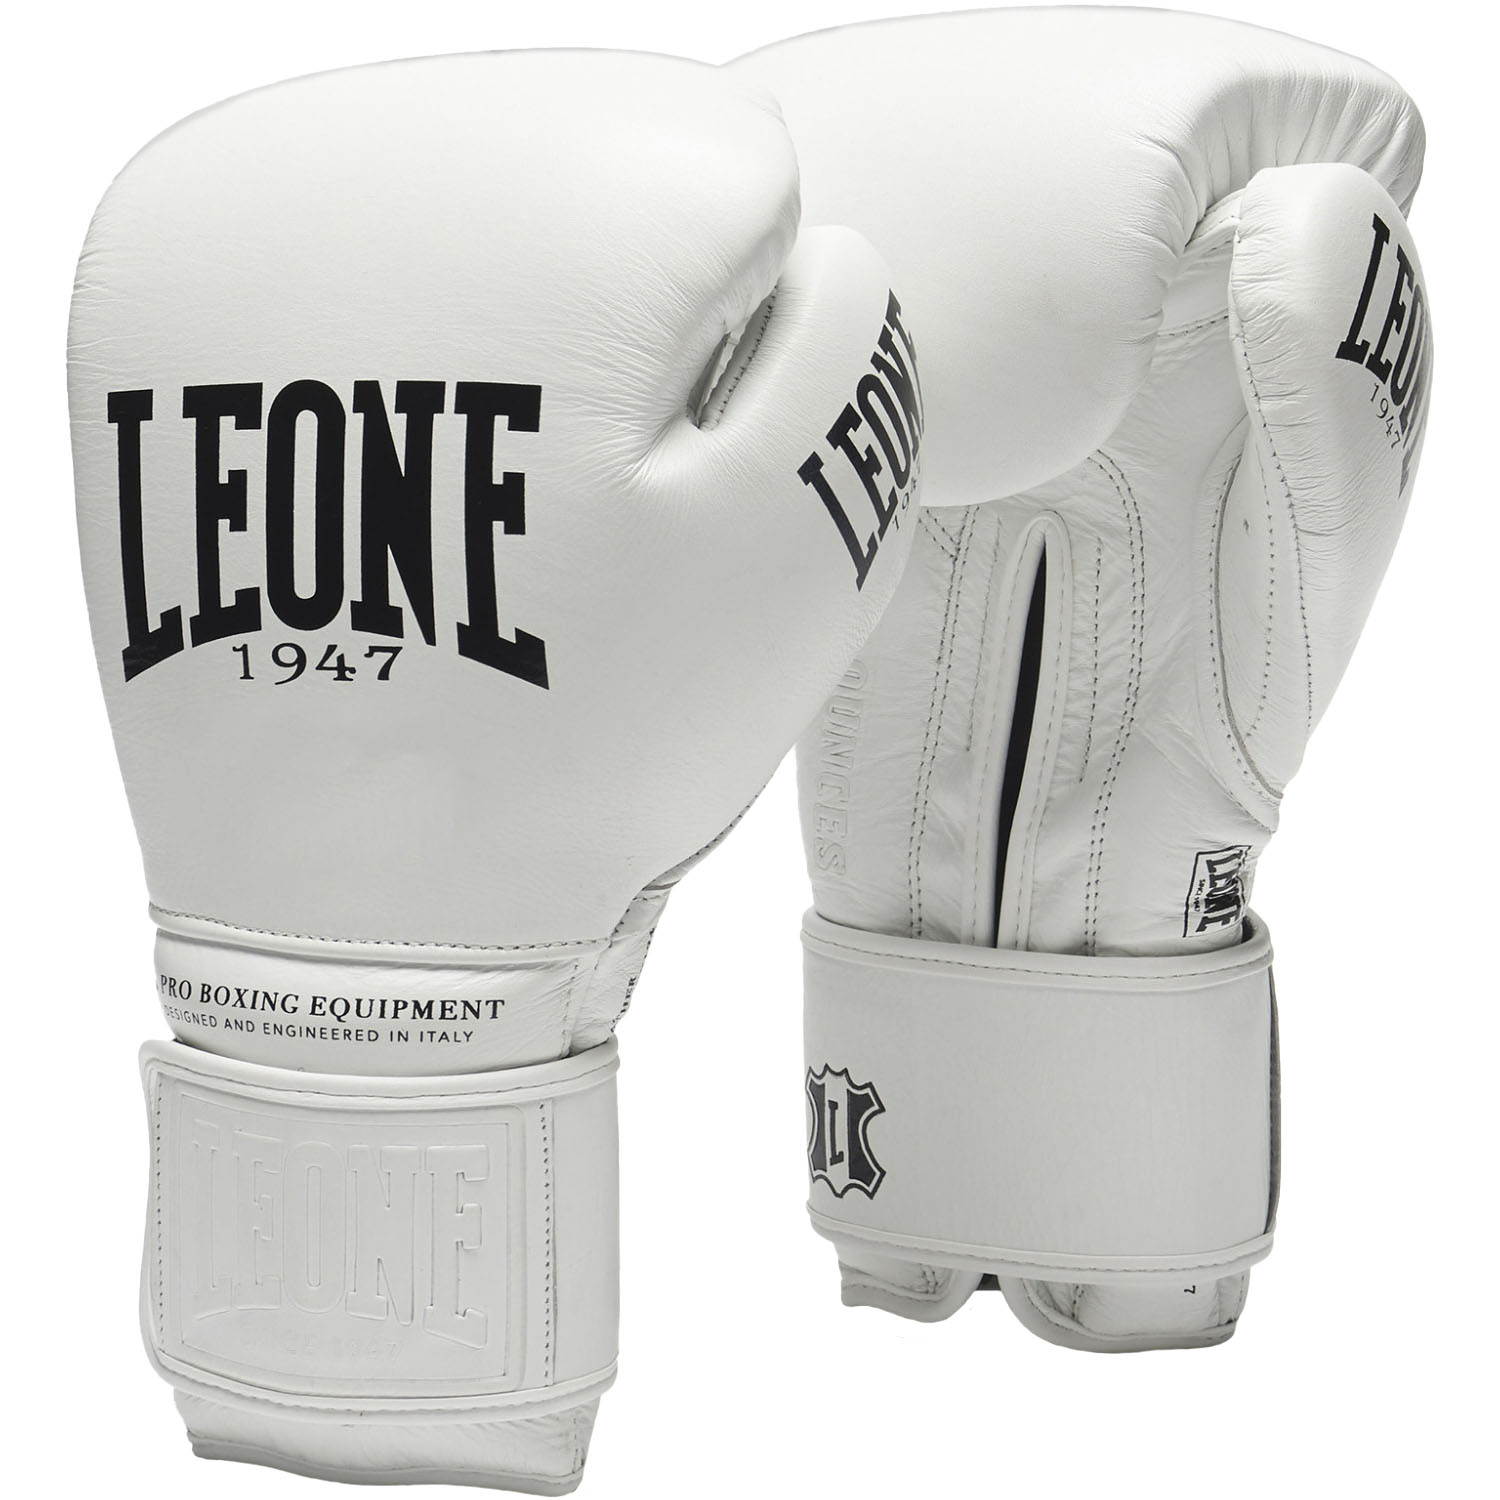 LEONE Boxing Gloves, The Greatest, GN111, white, 14 Oz